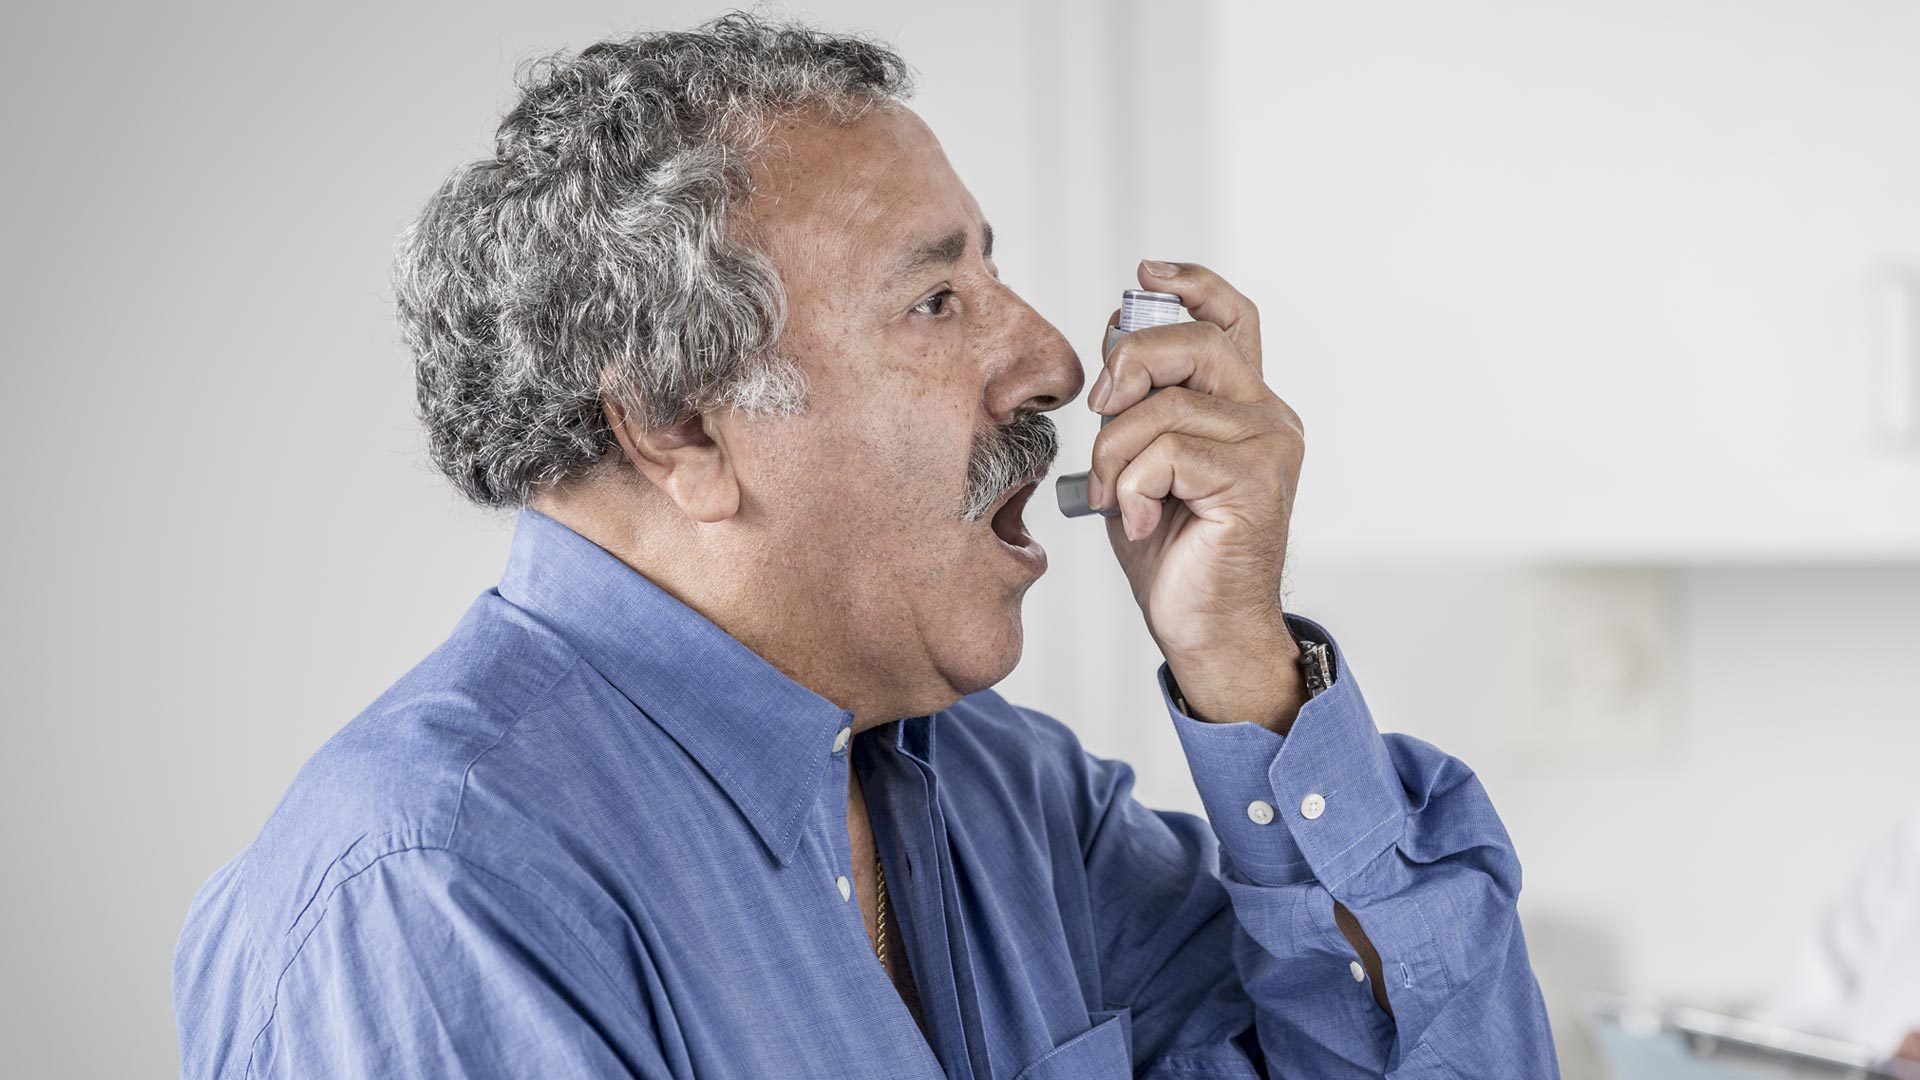 Uncovering Asthma’s Effects on COVID-19 Severity